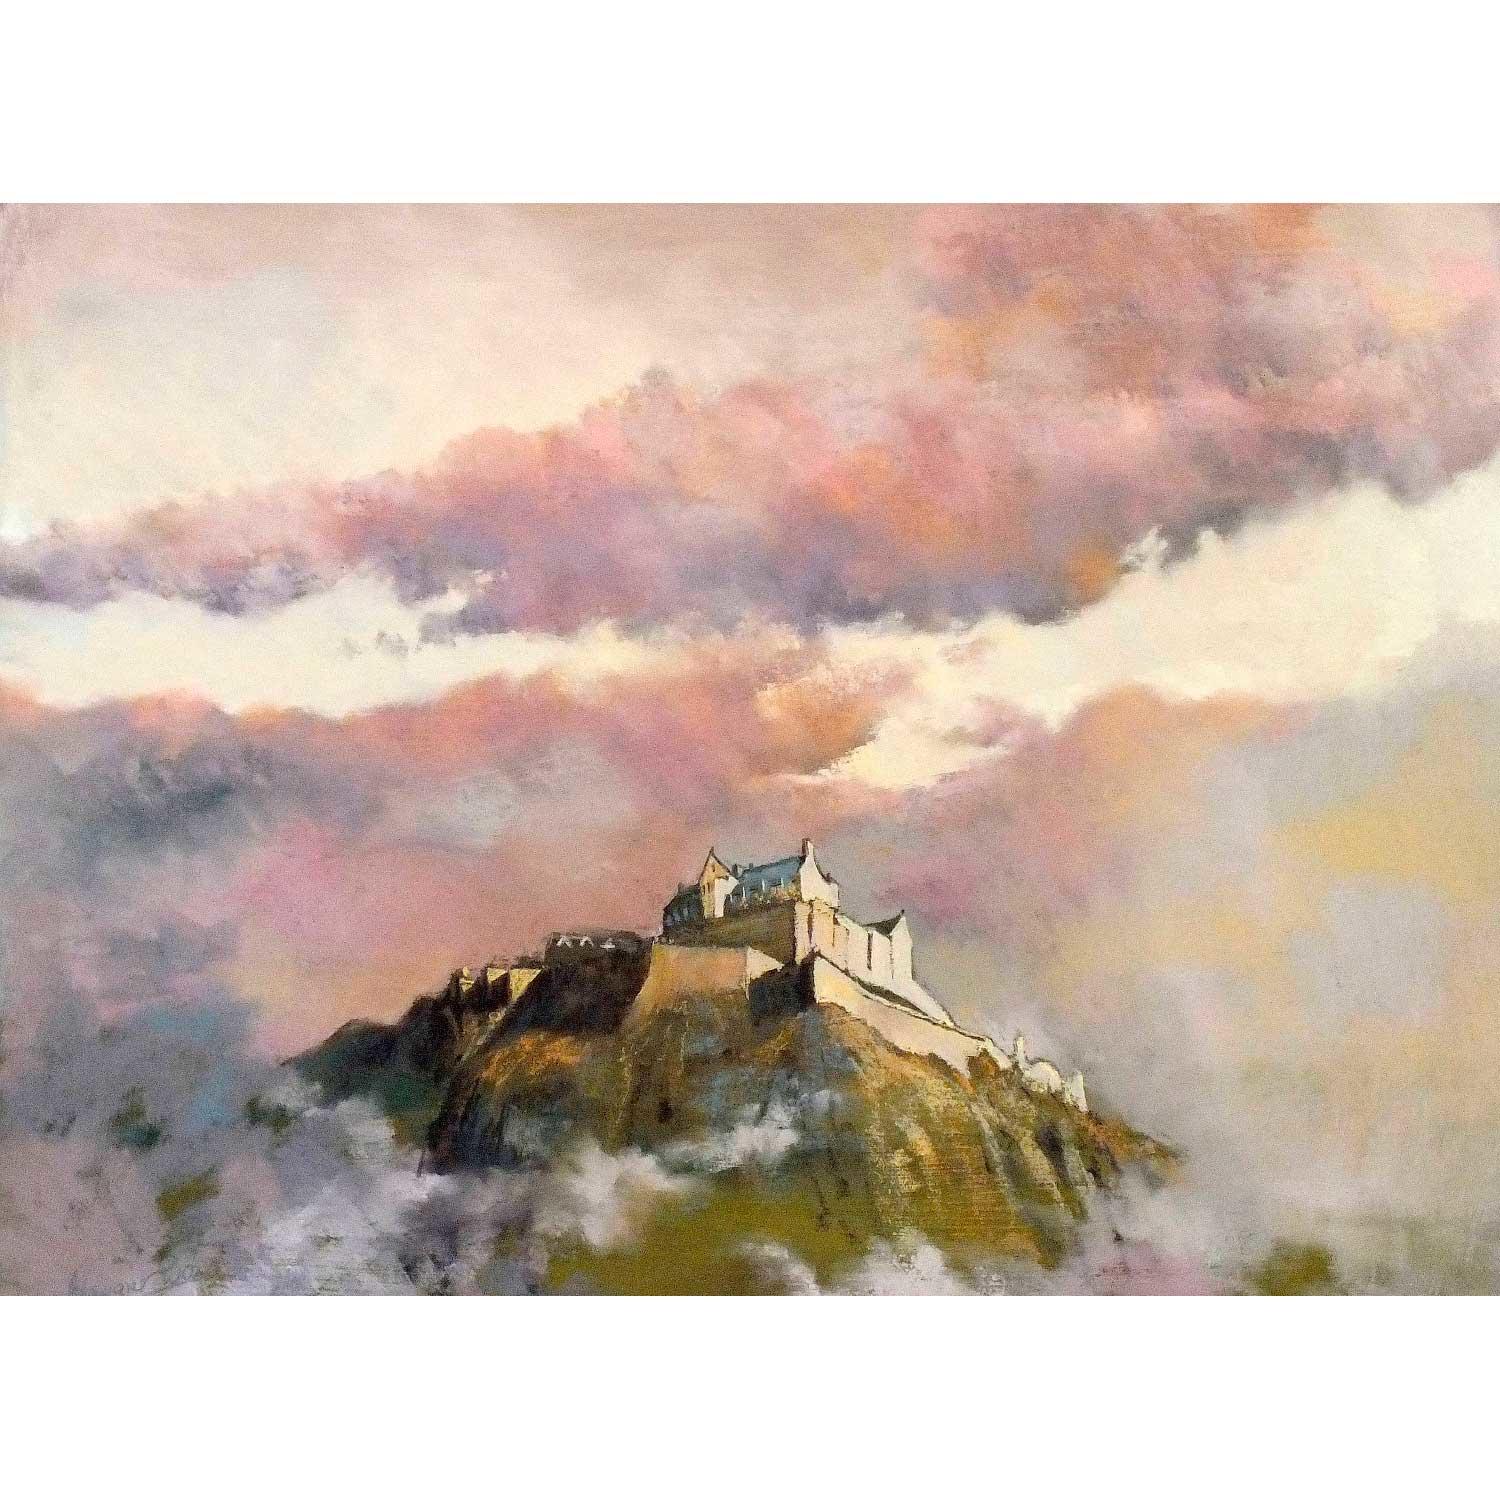 Mists and Majesty by Margaret Evans